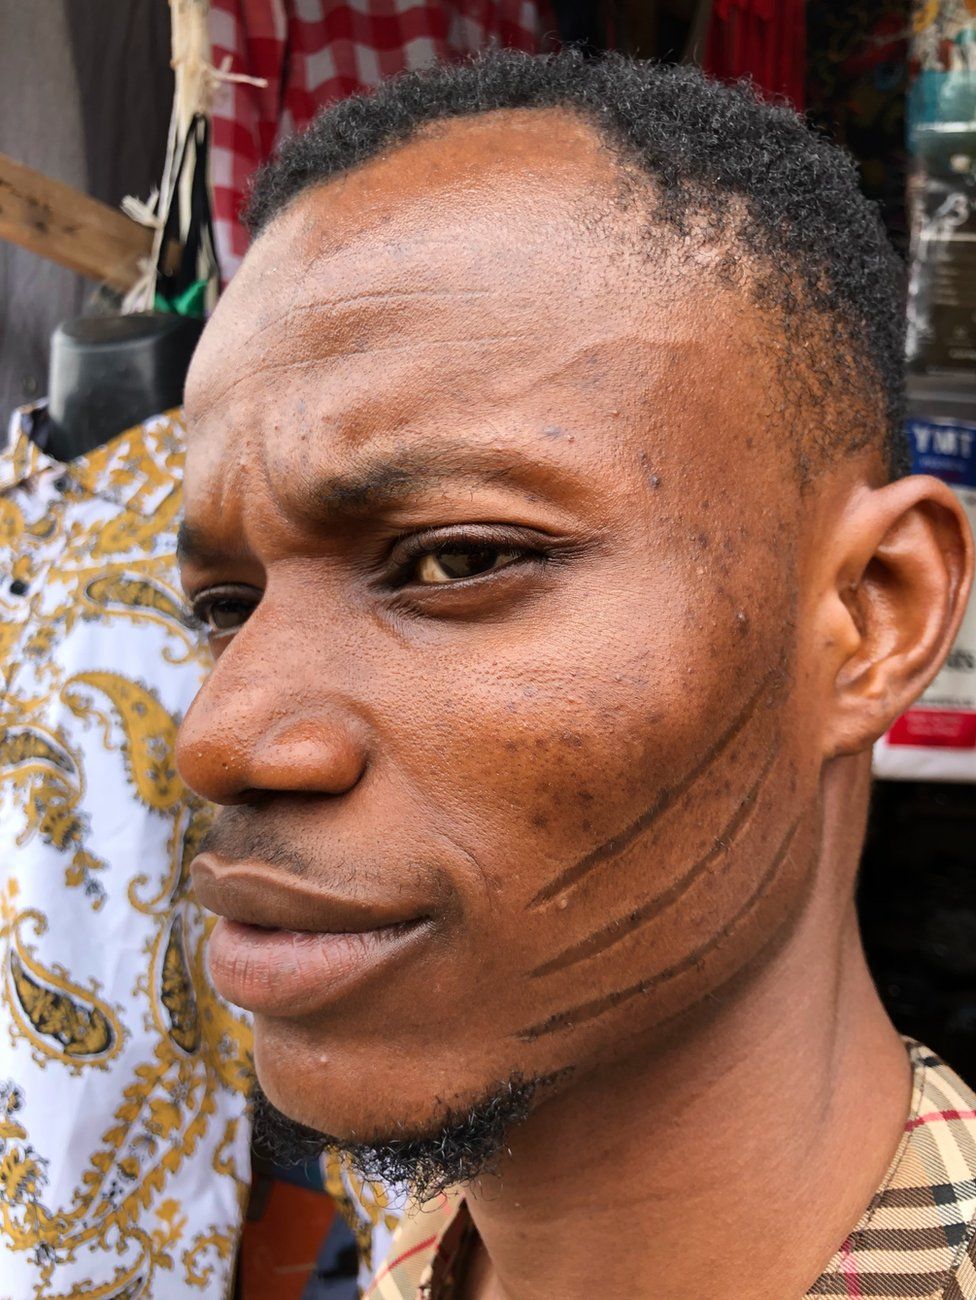 A man with scars on his face